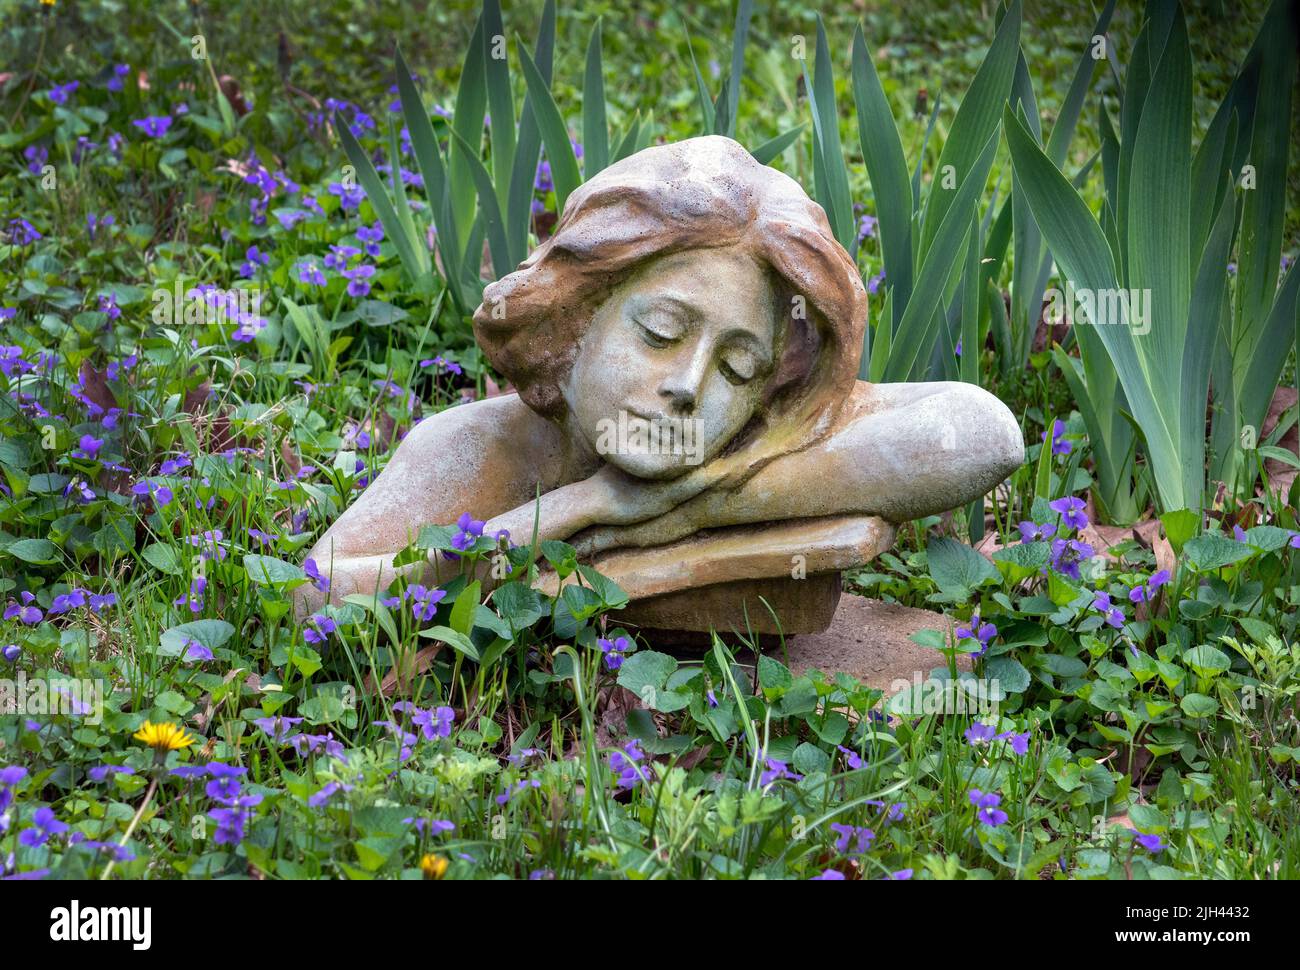 Cement sculpture of a sleeping girl looks at home in this patch of violets and growing iris plants Stock Photo